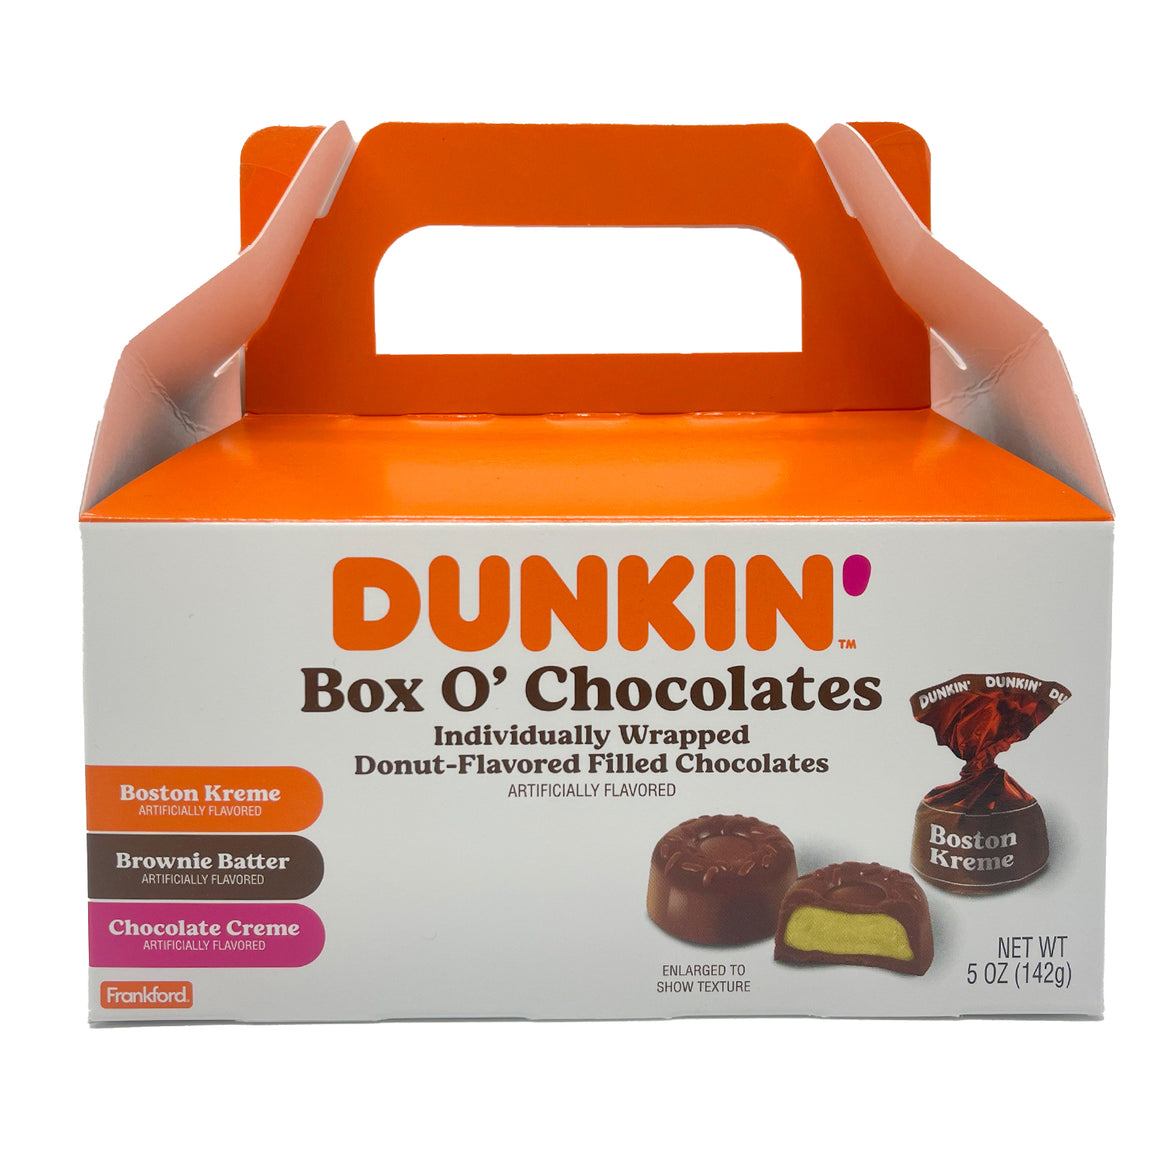 All City Candy Dunkin' Box O' Chocolates 5 oz. Gift Box Chocolate Frankford Candy For fresh candy and great service, visit www.allcitycandy.com